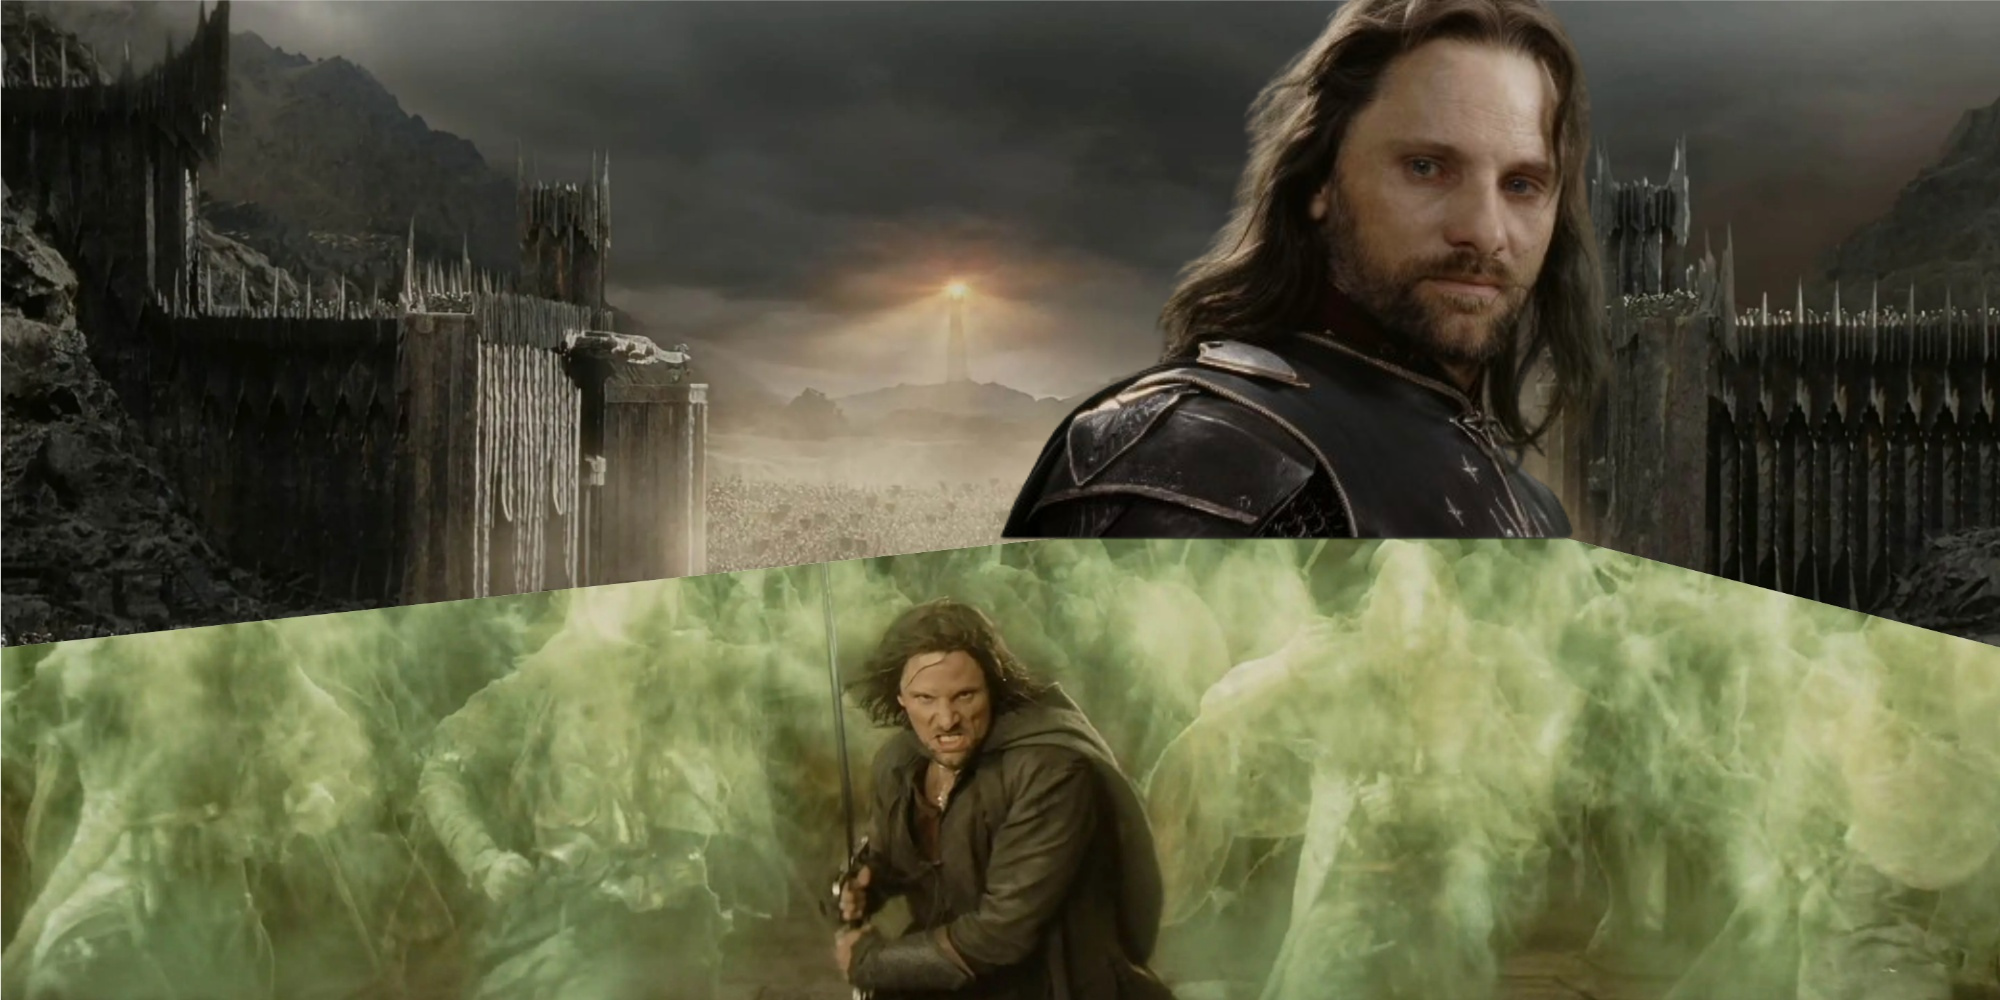 A horizontal split image, top is Aragorn imposed over Mordor in background, bottom is Aragorn leading the Dead Army